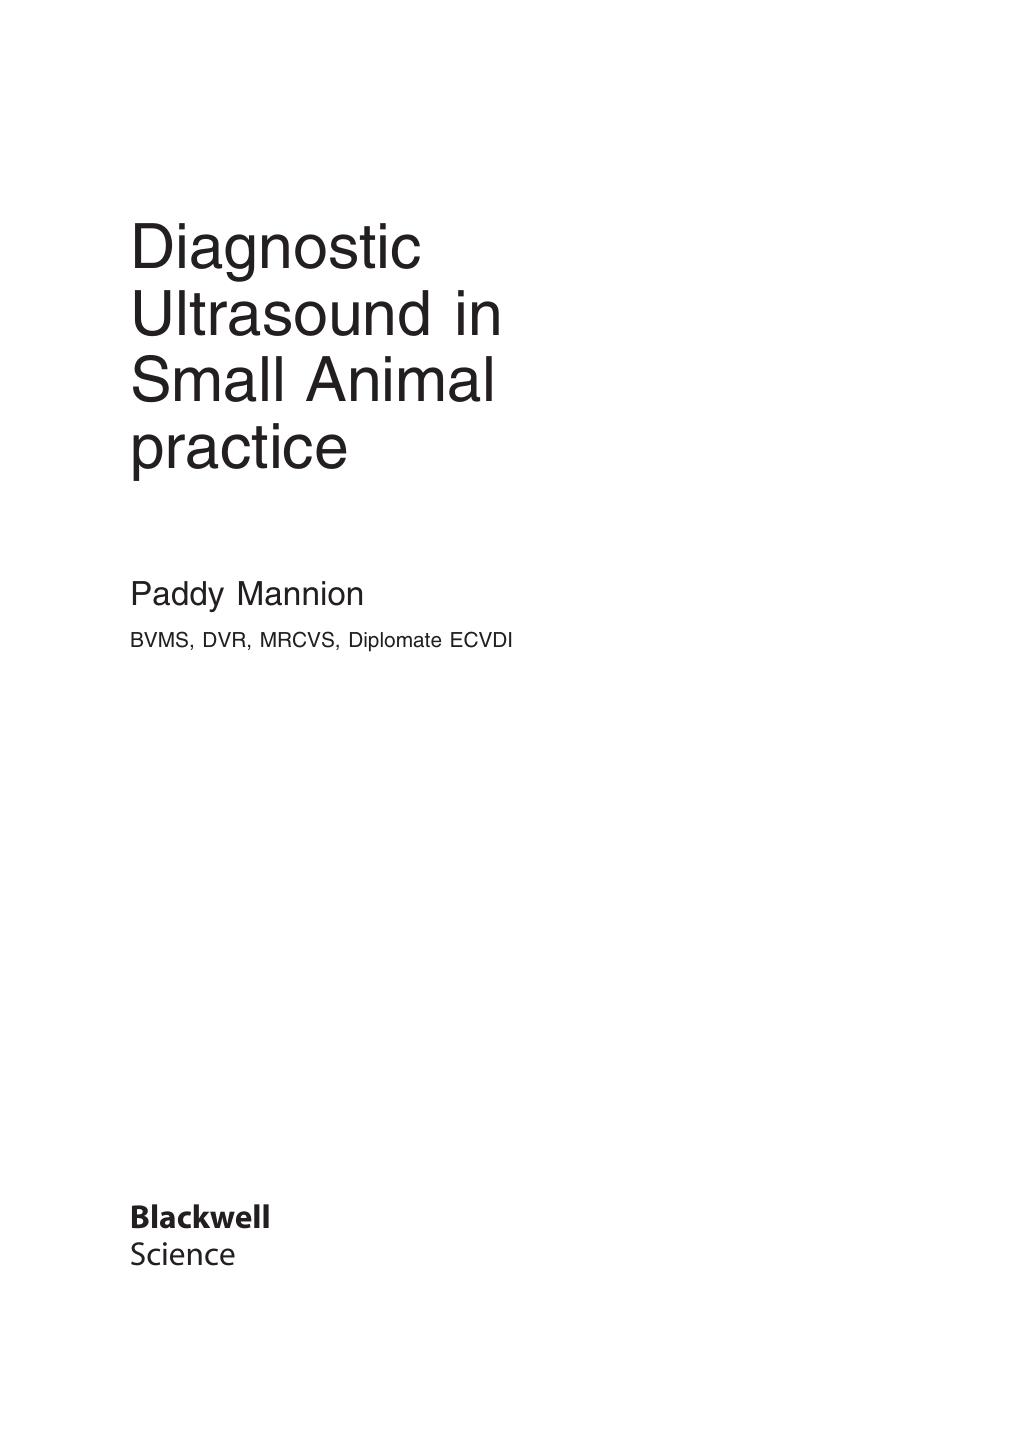 Paddy Mannion-Diagnostic Ultrasound in Small Animal Practice-Blackwell Publishing 2006